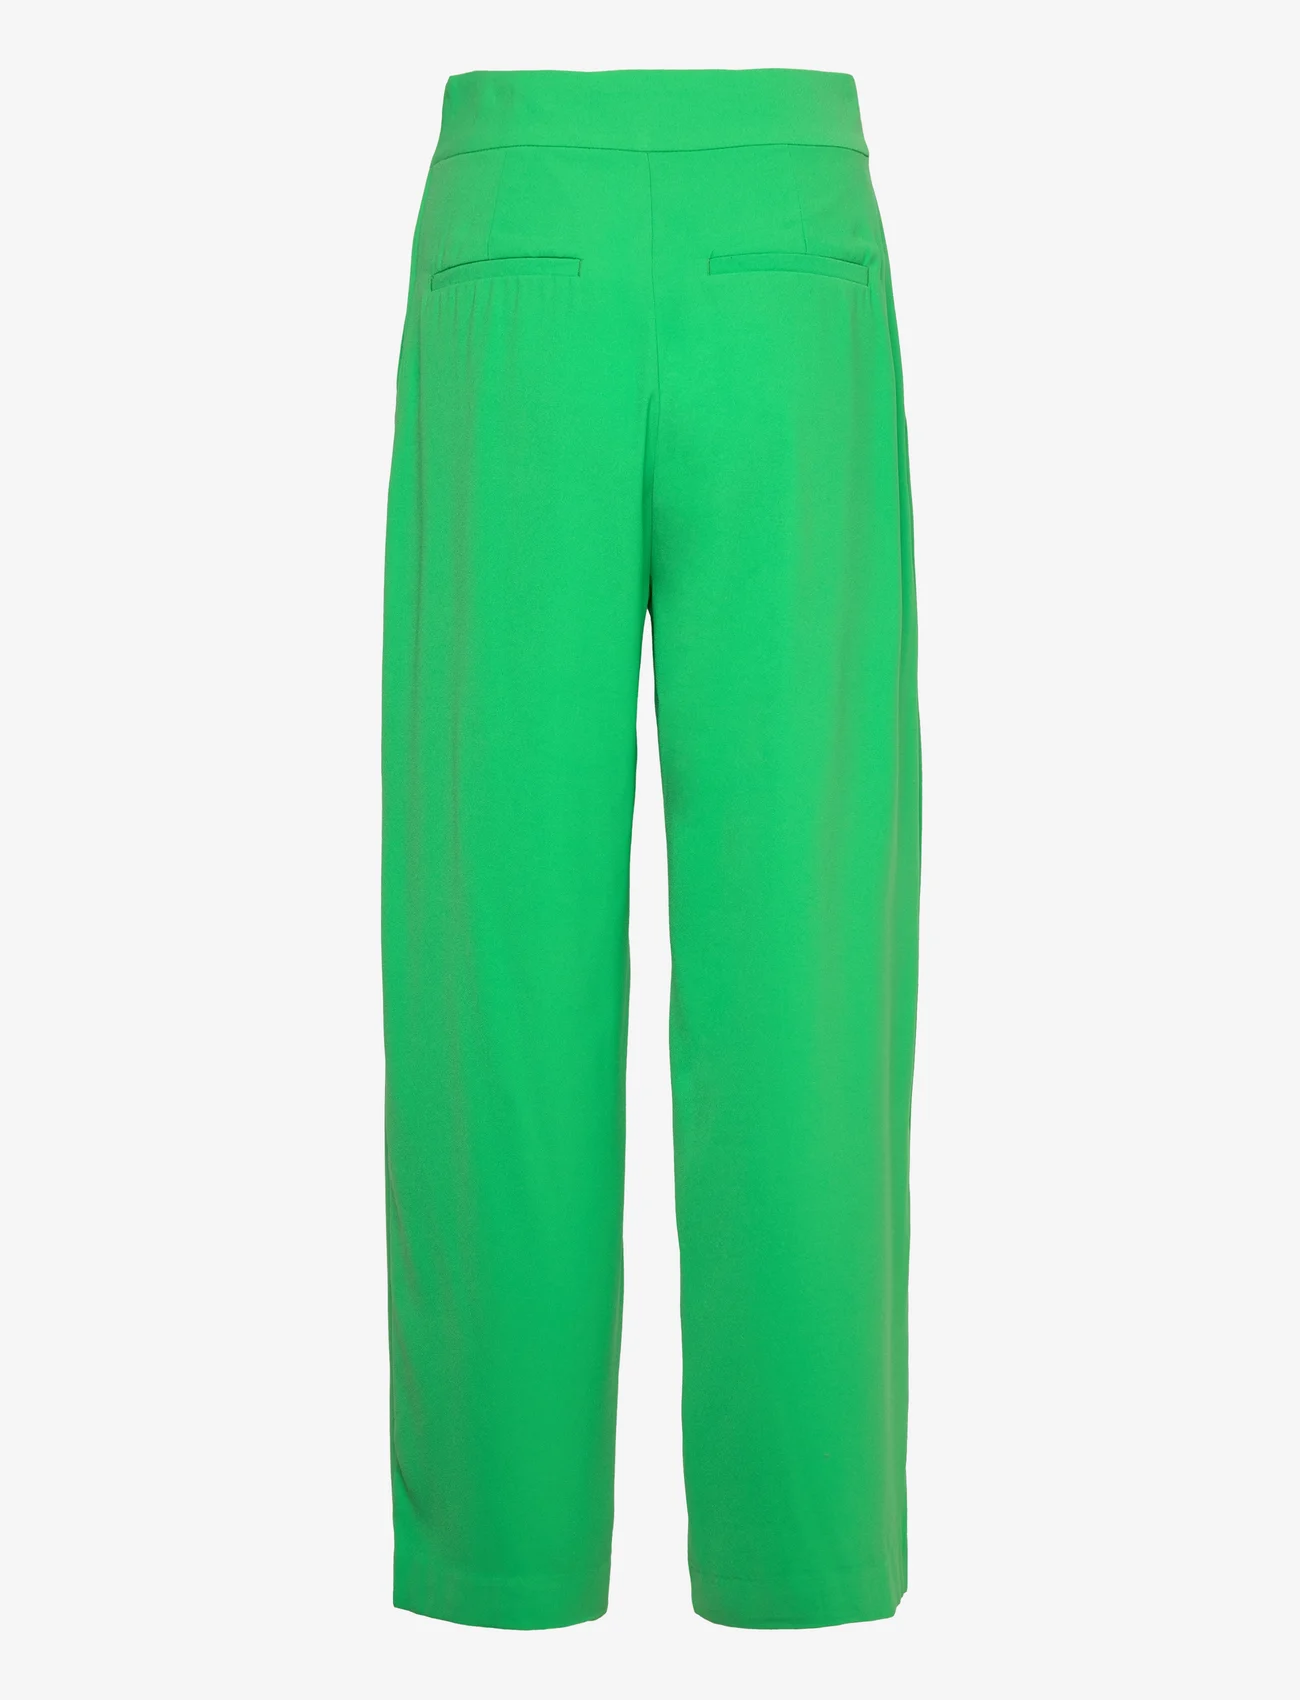 Lindex - Trousers Blair exclusive - najniższe ceny - strong green - 1